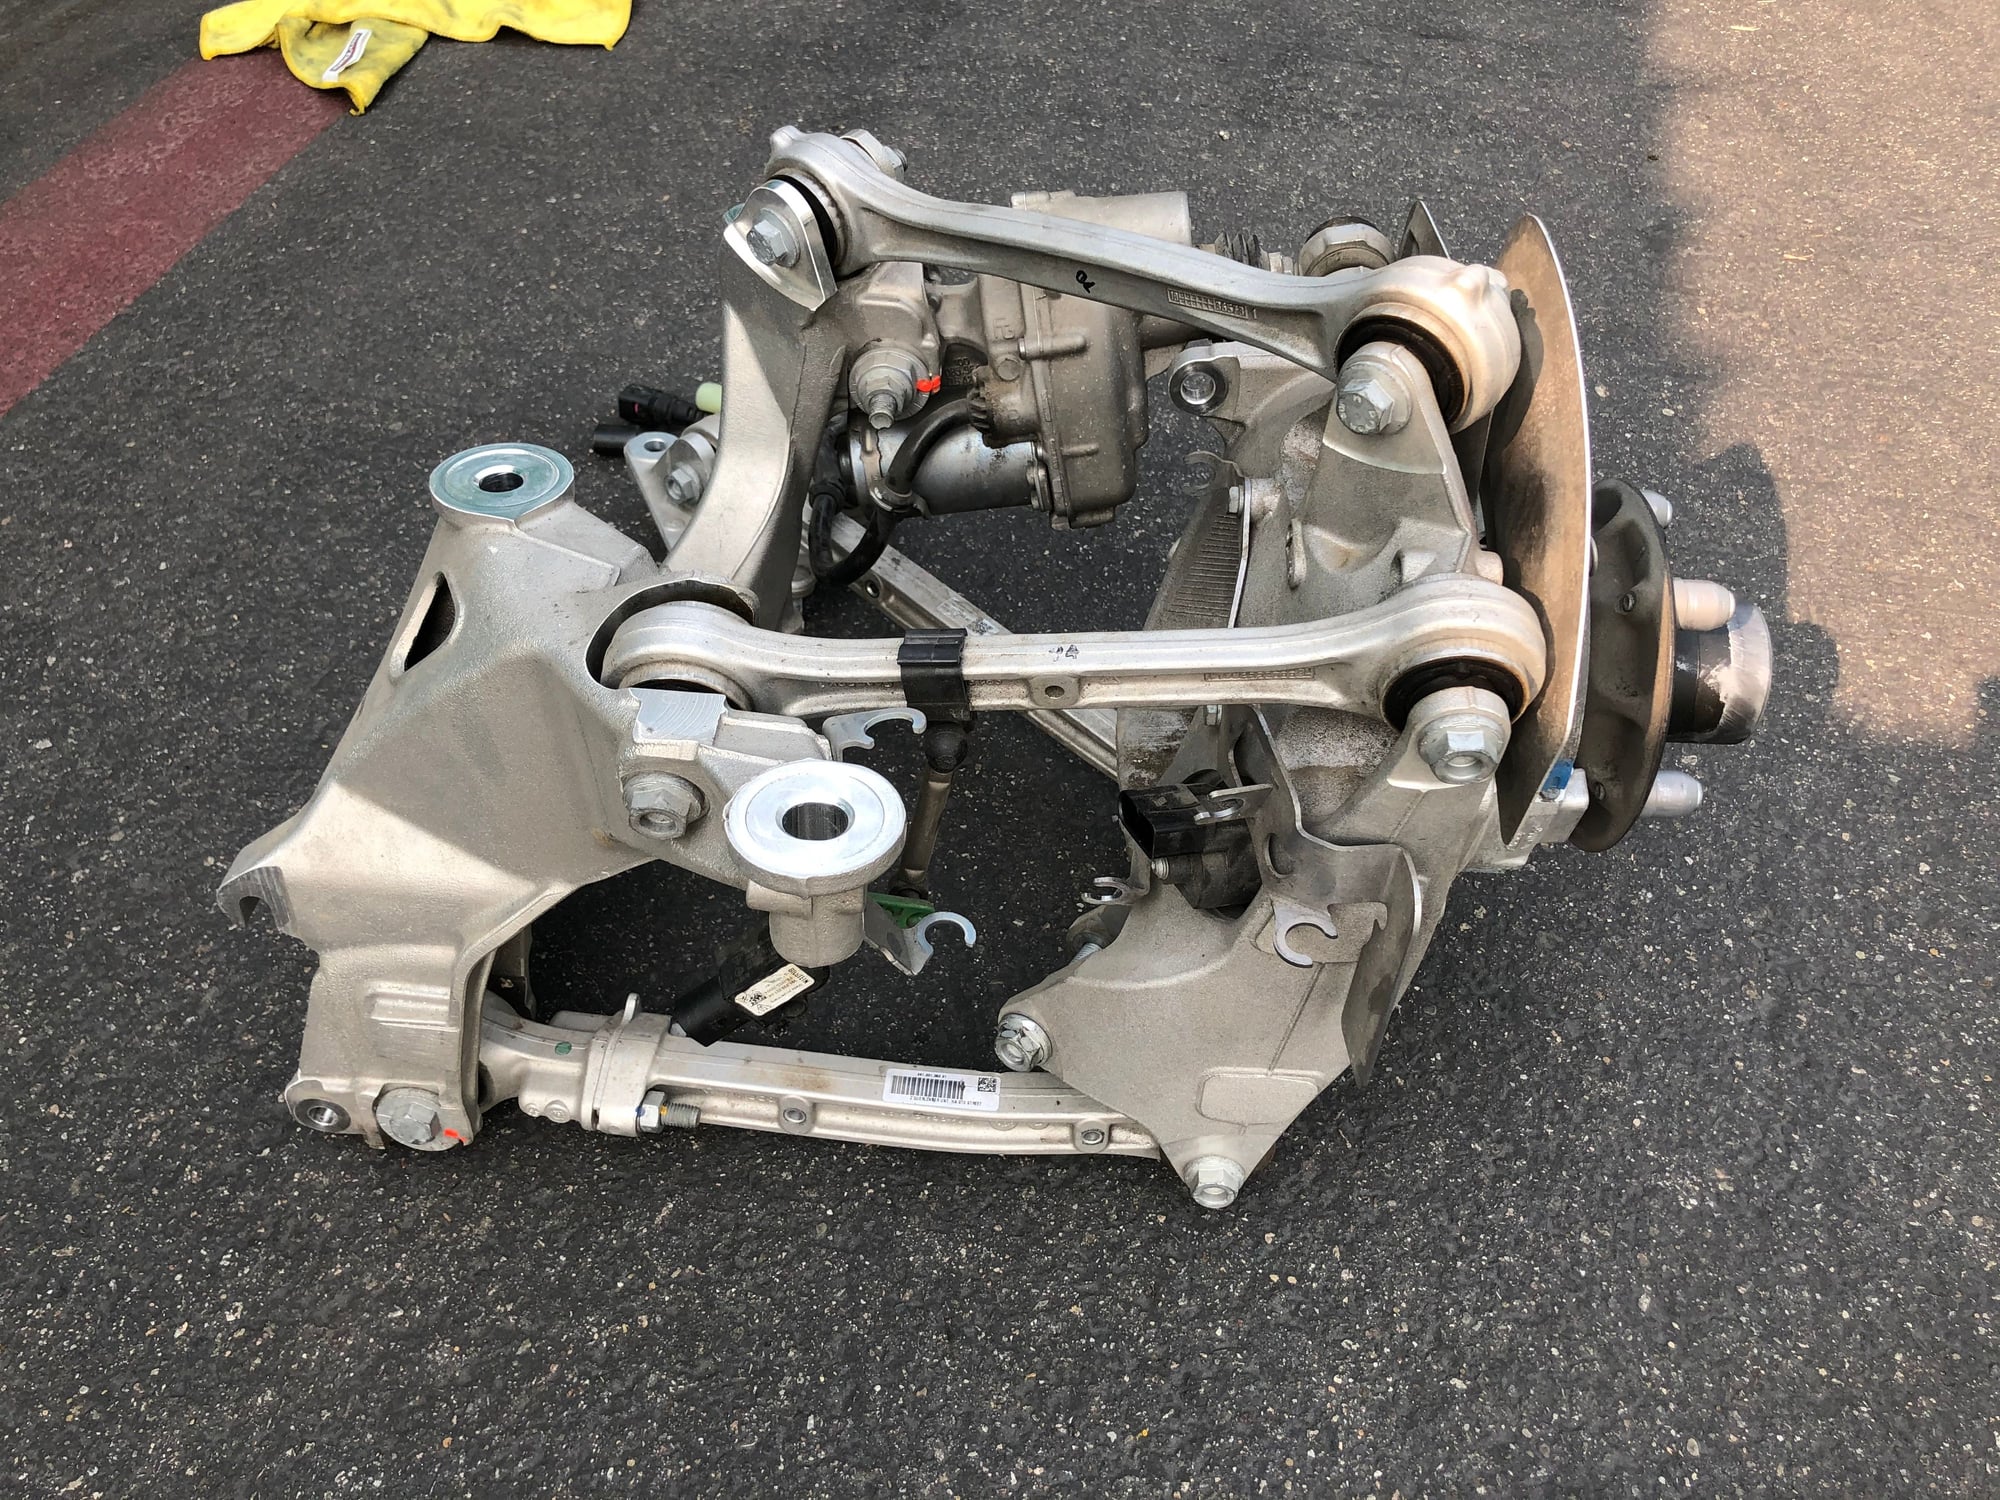 2018 Porsche GT3 - Entire rear spindle left and right - Steering/Suspension - $3,500 - Irvine, CA 92620, United States